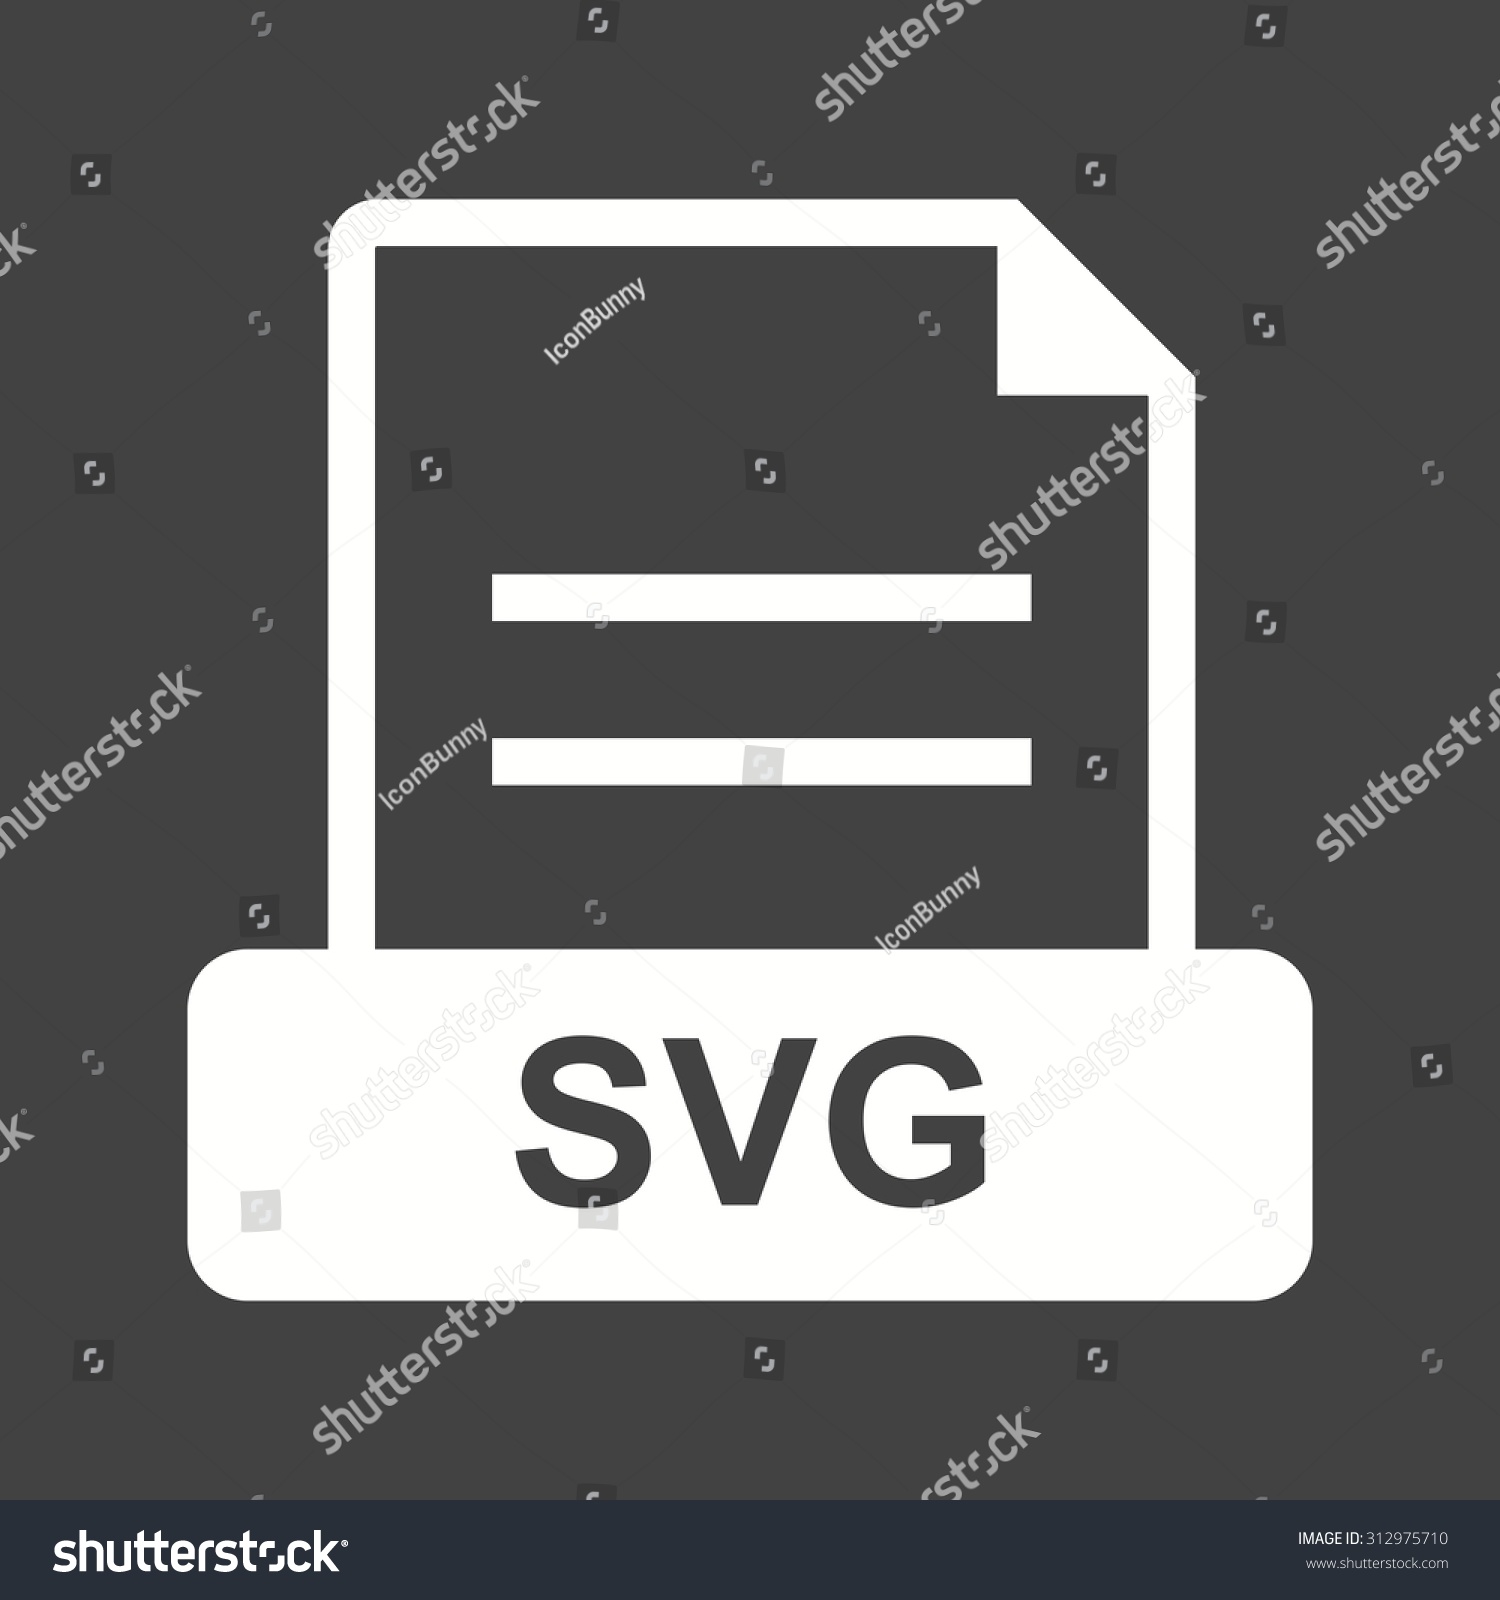 Download Svg File Symbol Icon Vector Image Stock Vector Royalty Free 312975710